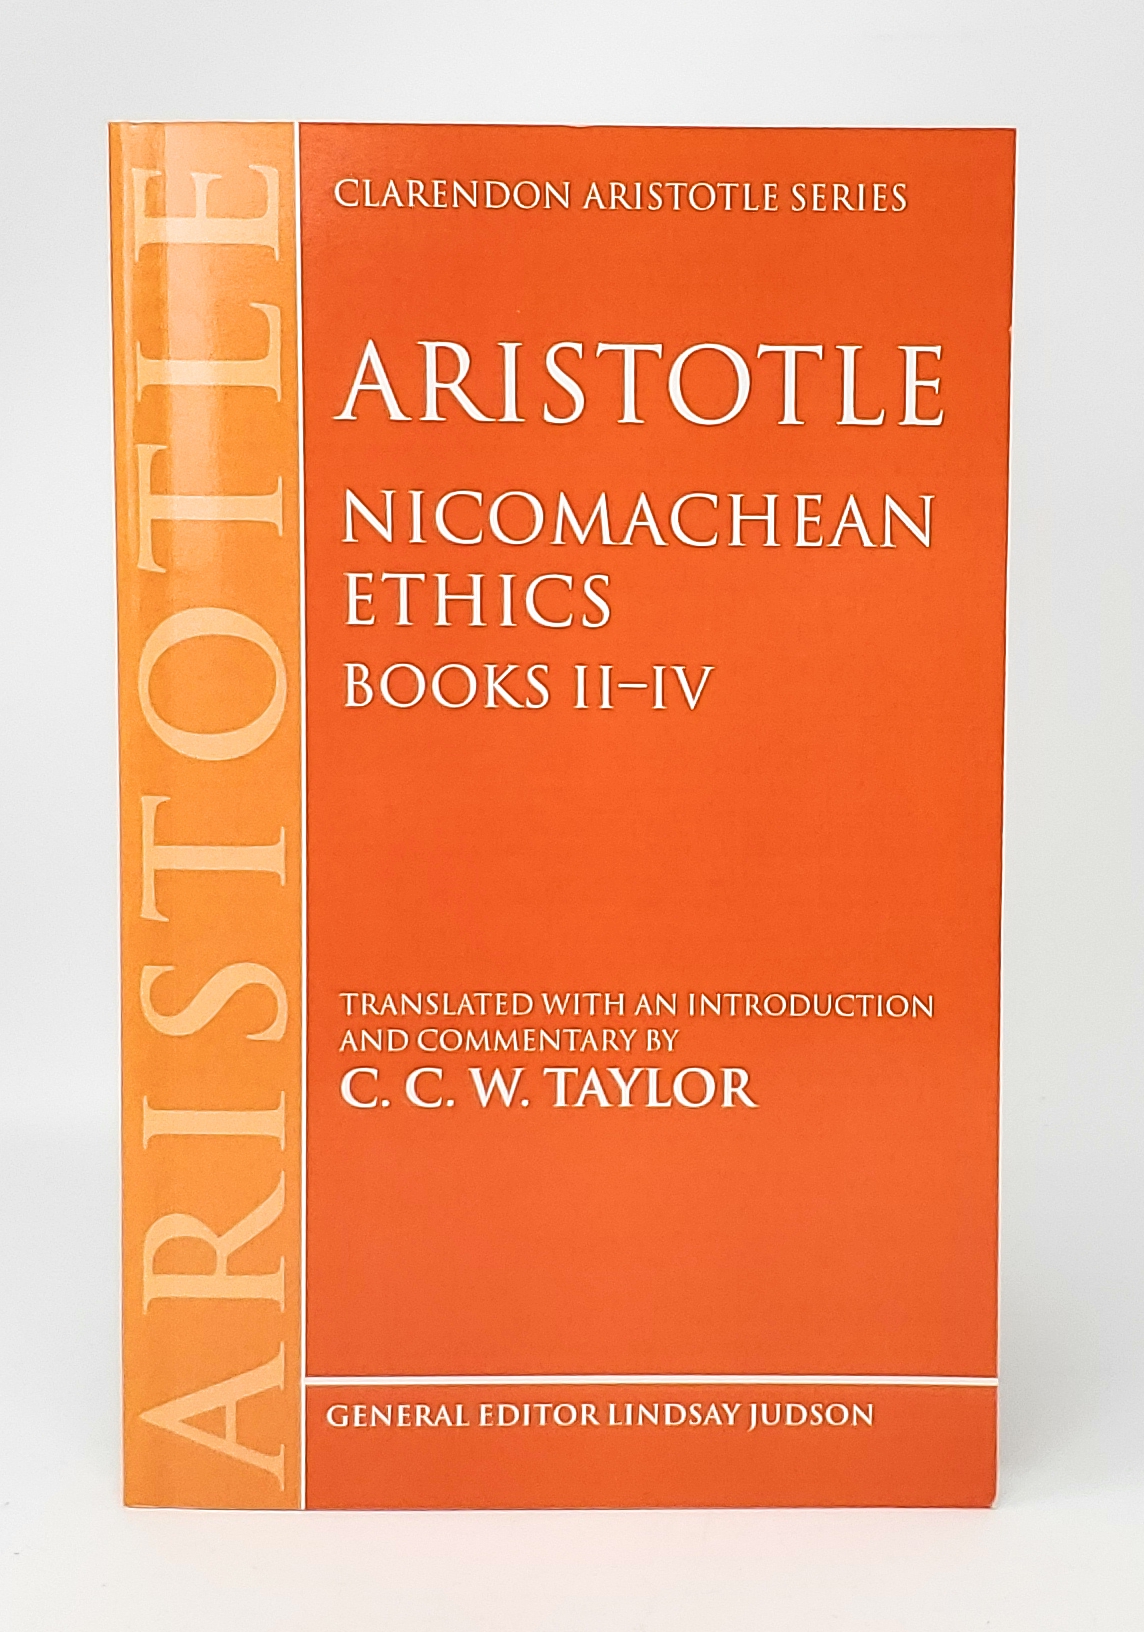 Aristotle: Nicomachean Ethics, Books II-IV: Translated with an introduction and commentary (Clarendon Aristotle Series) - Taylor, C.C.W.